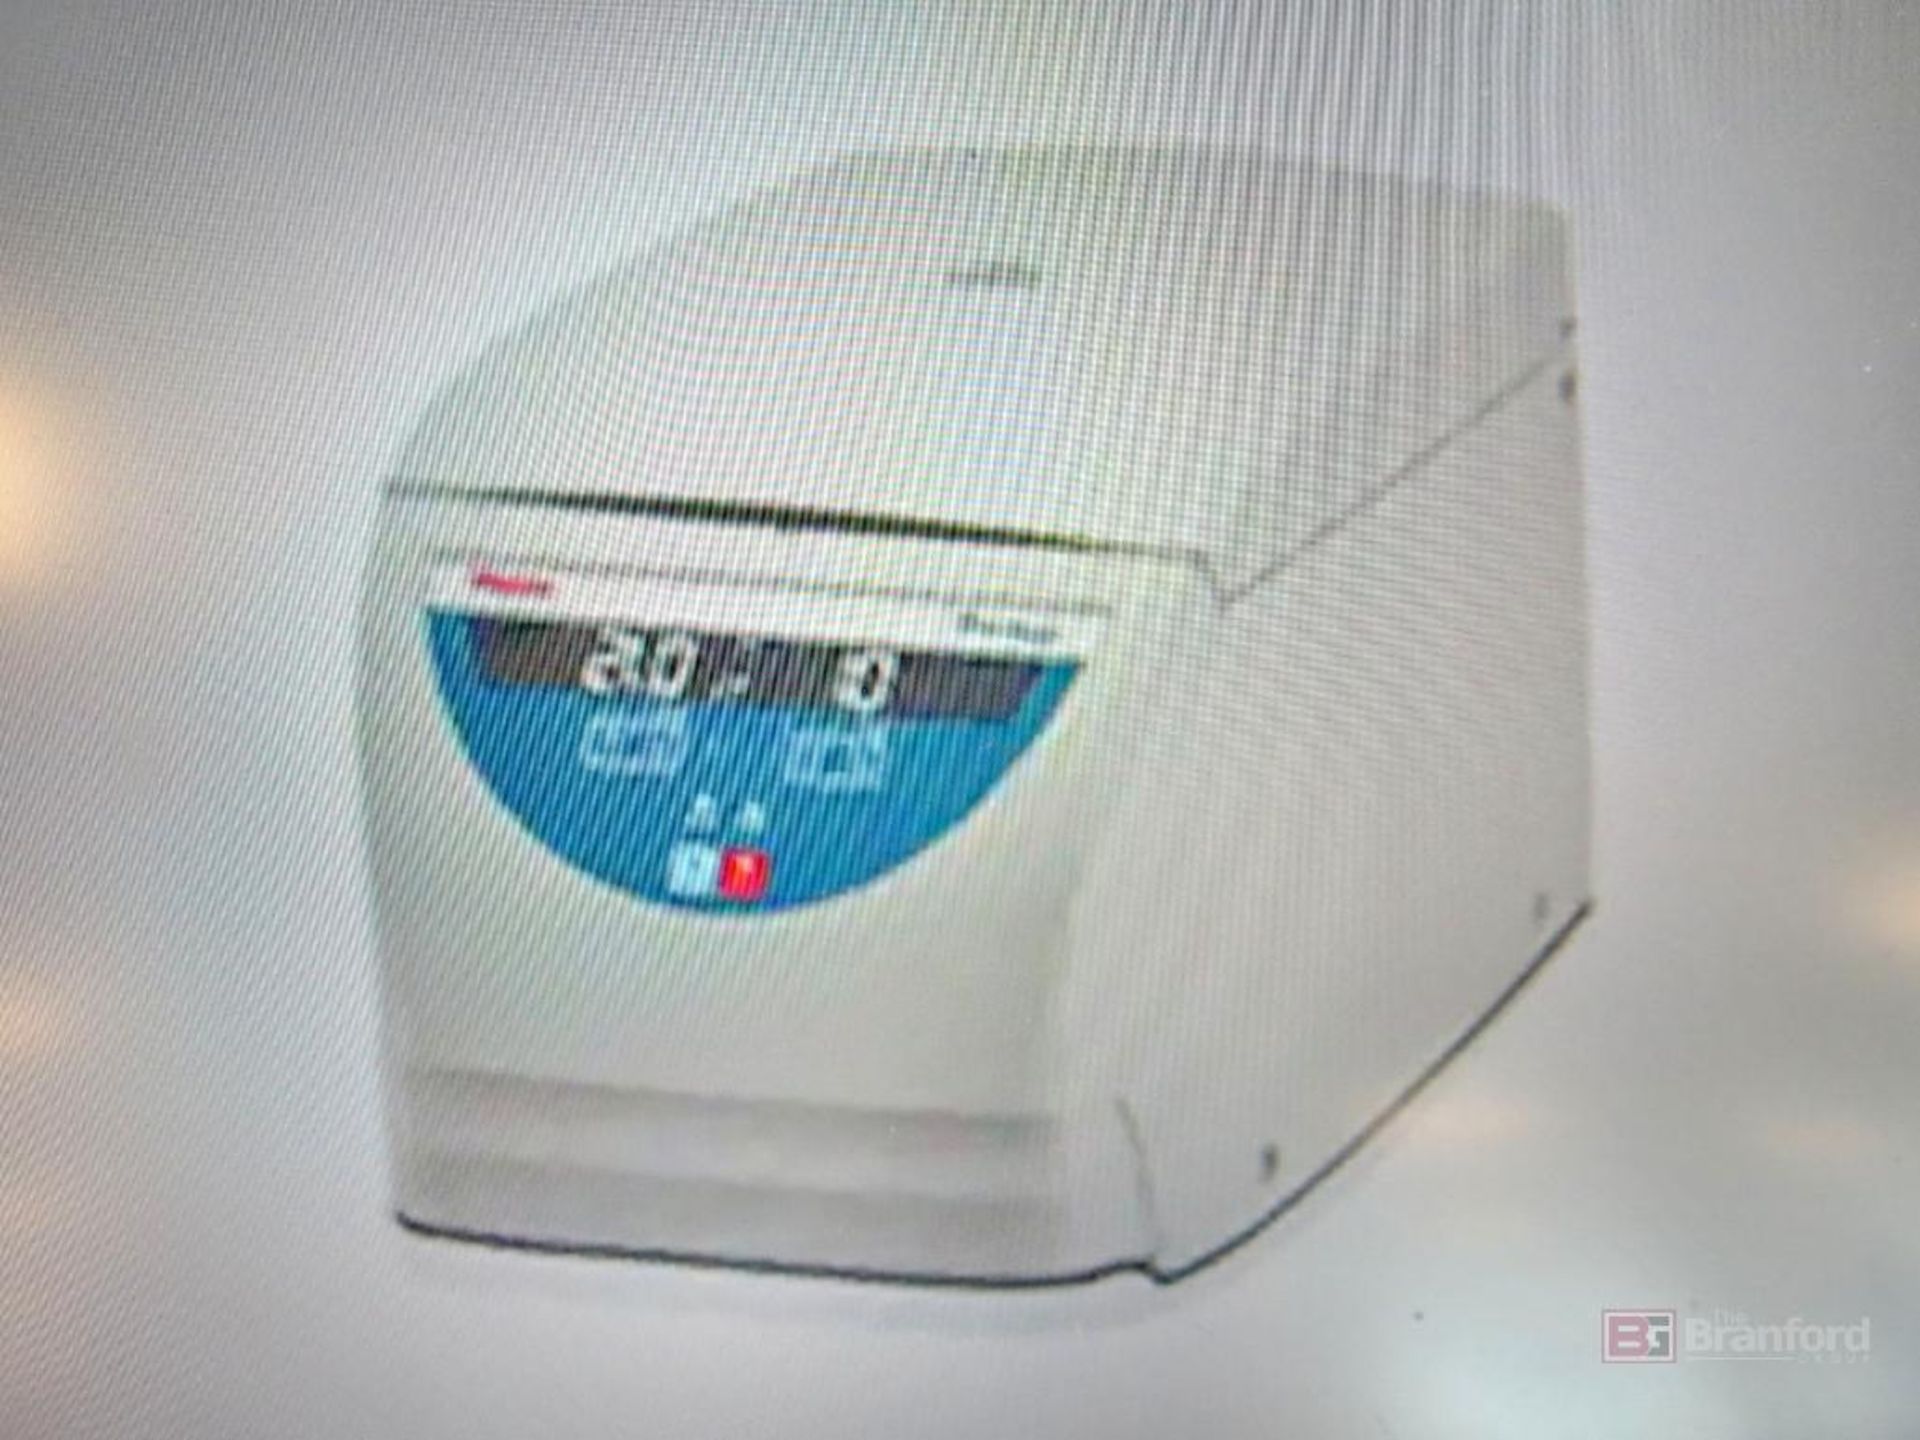 Thermo Sorvall Legend Micro 21 Centrifuge (New in Box)